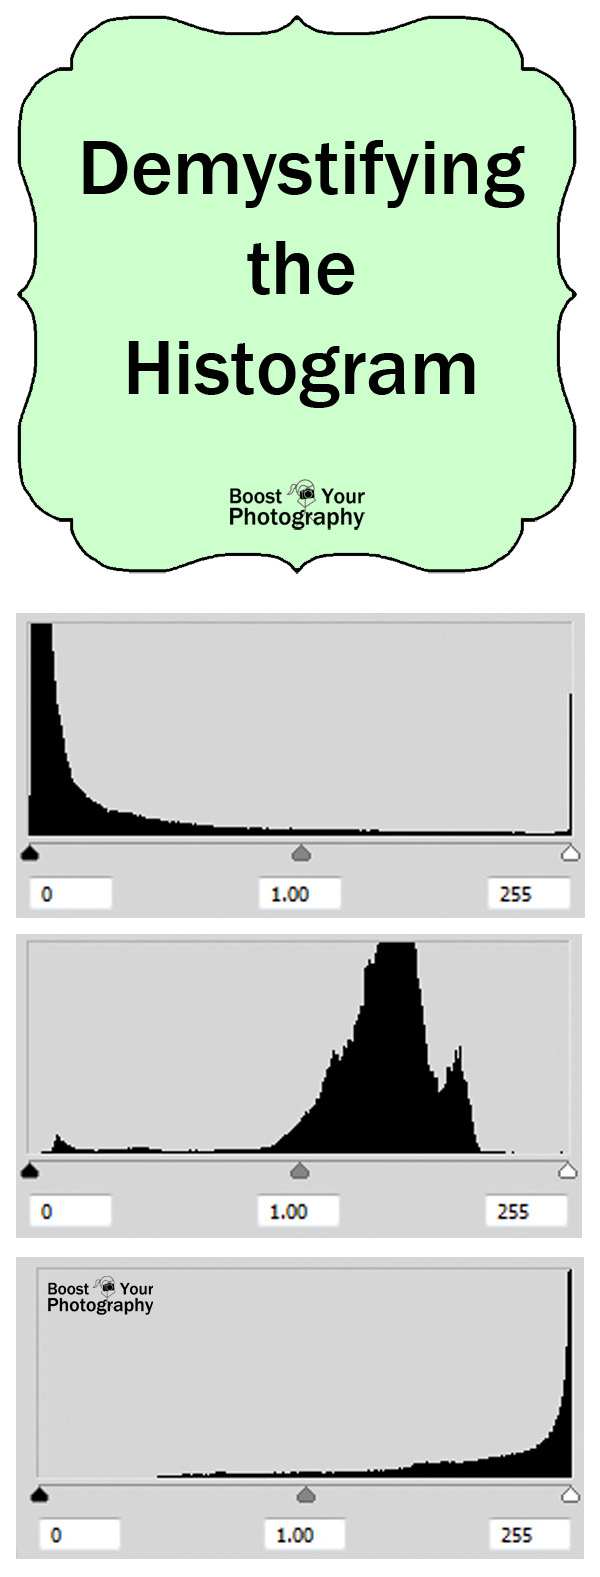 Demystifying the Histogram | Boost Your Photography